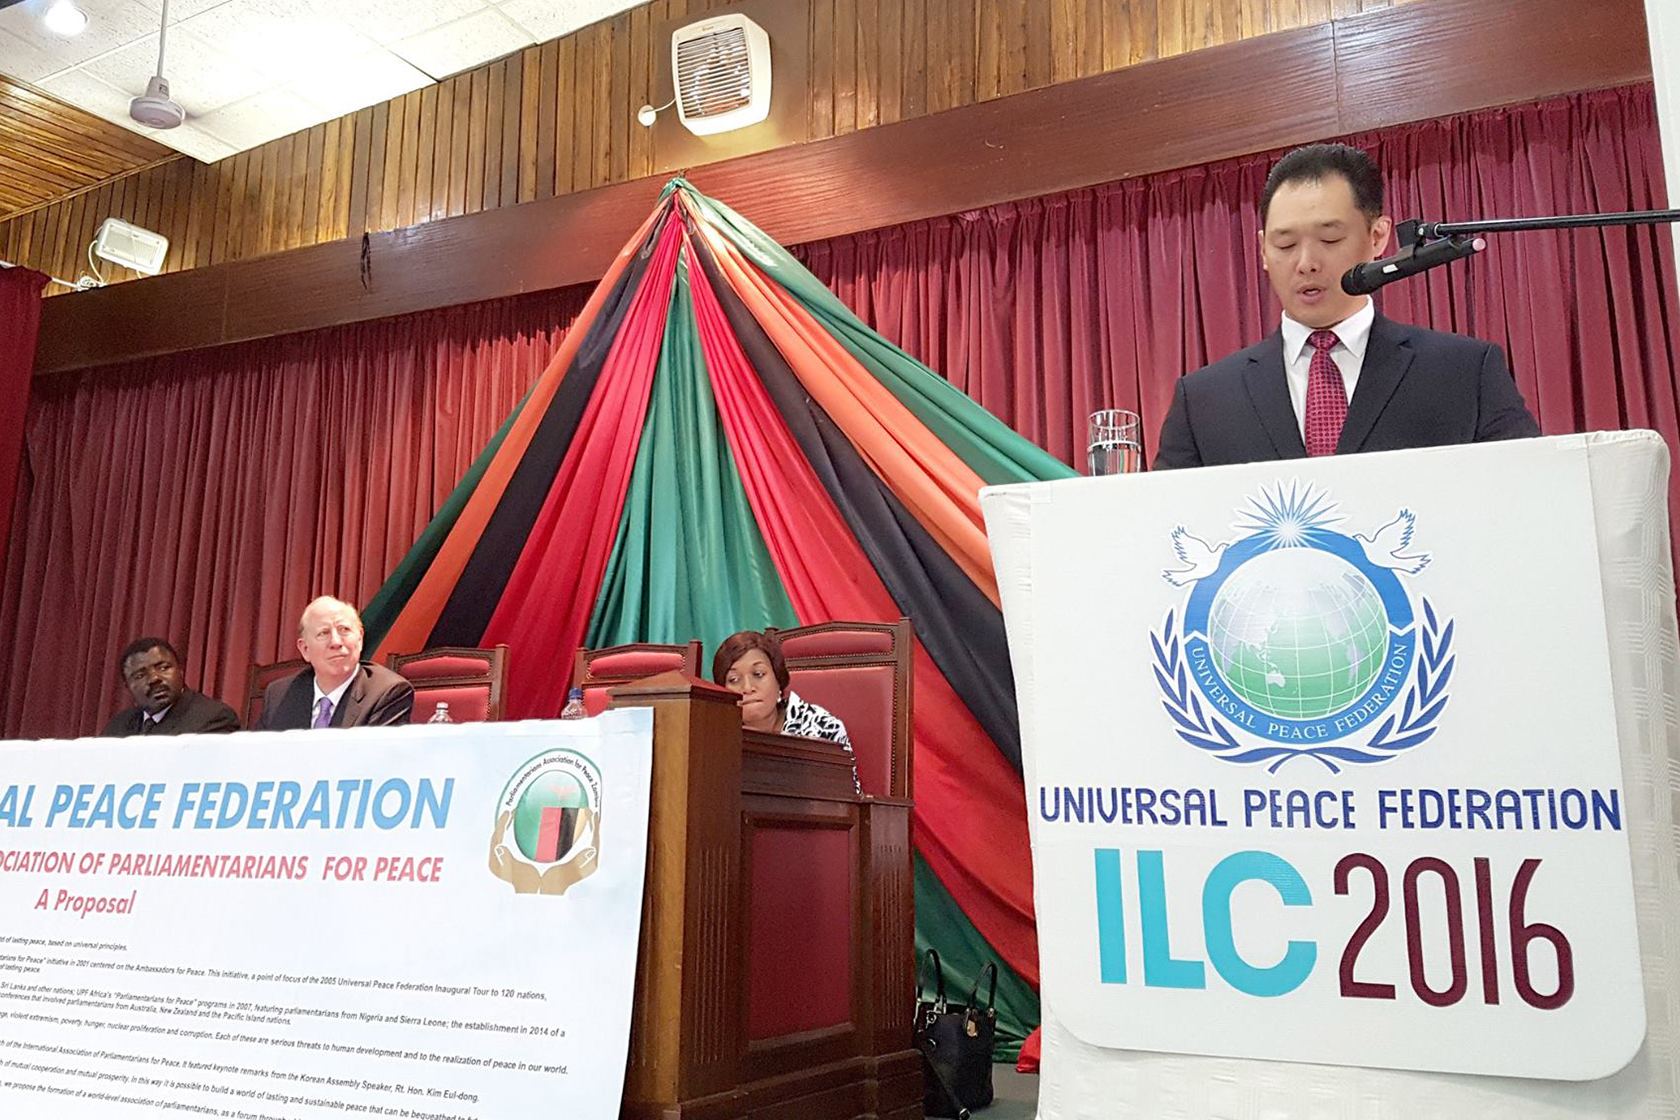 Inauguration of International Association of Parliamentarians for Peace in Zambia (November 7th, 2016)